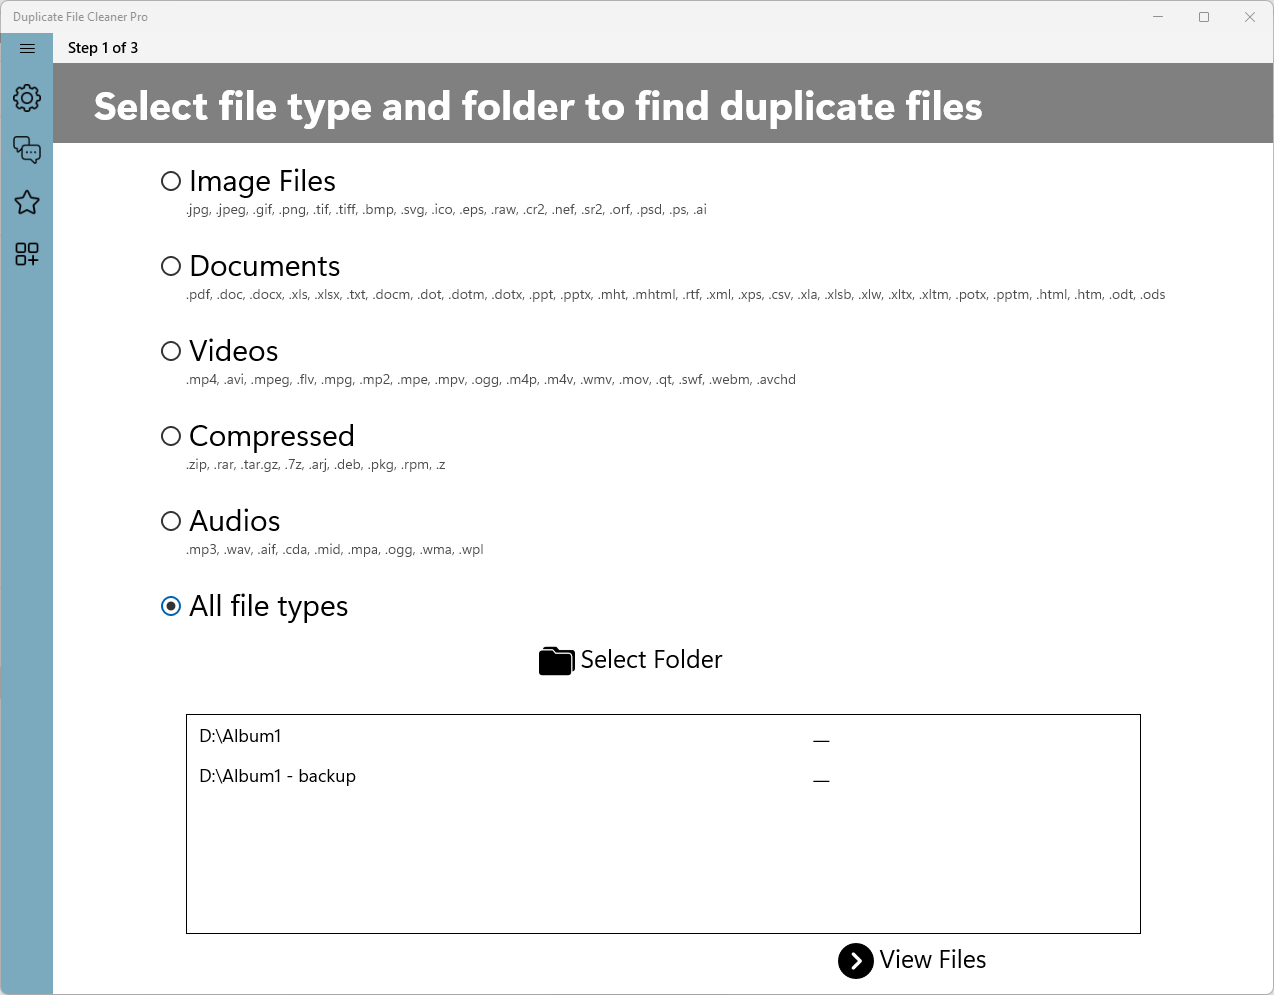 Select file type and folders